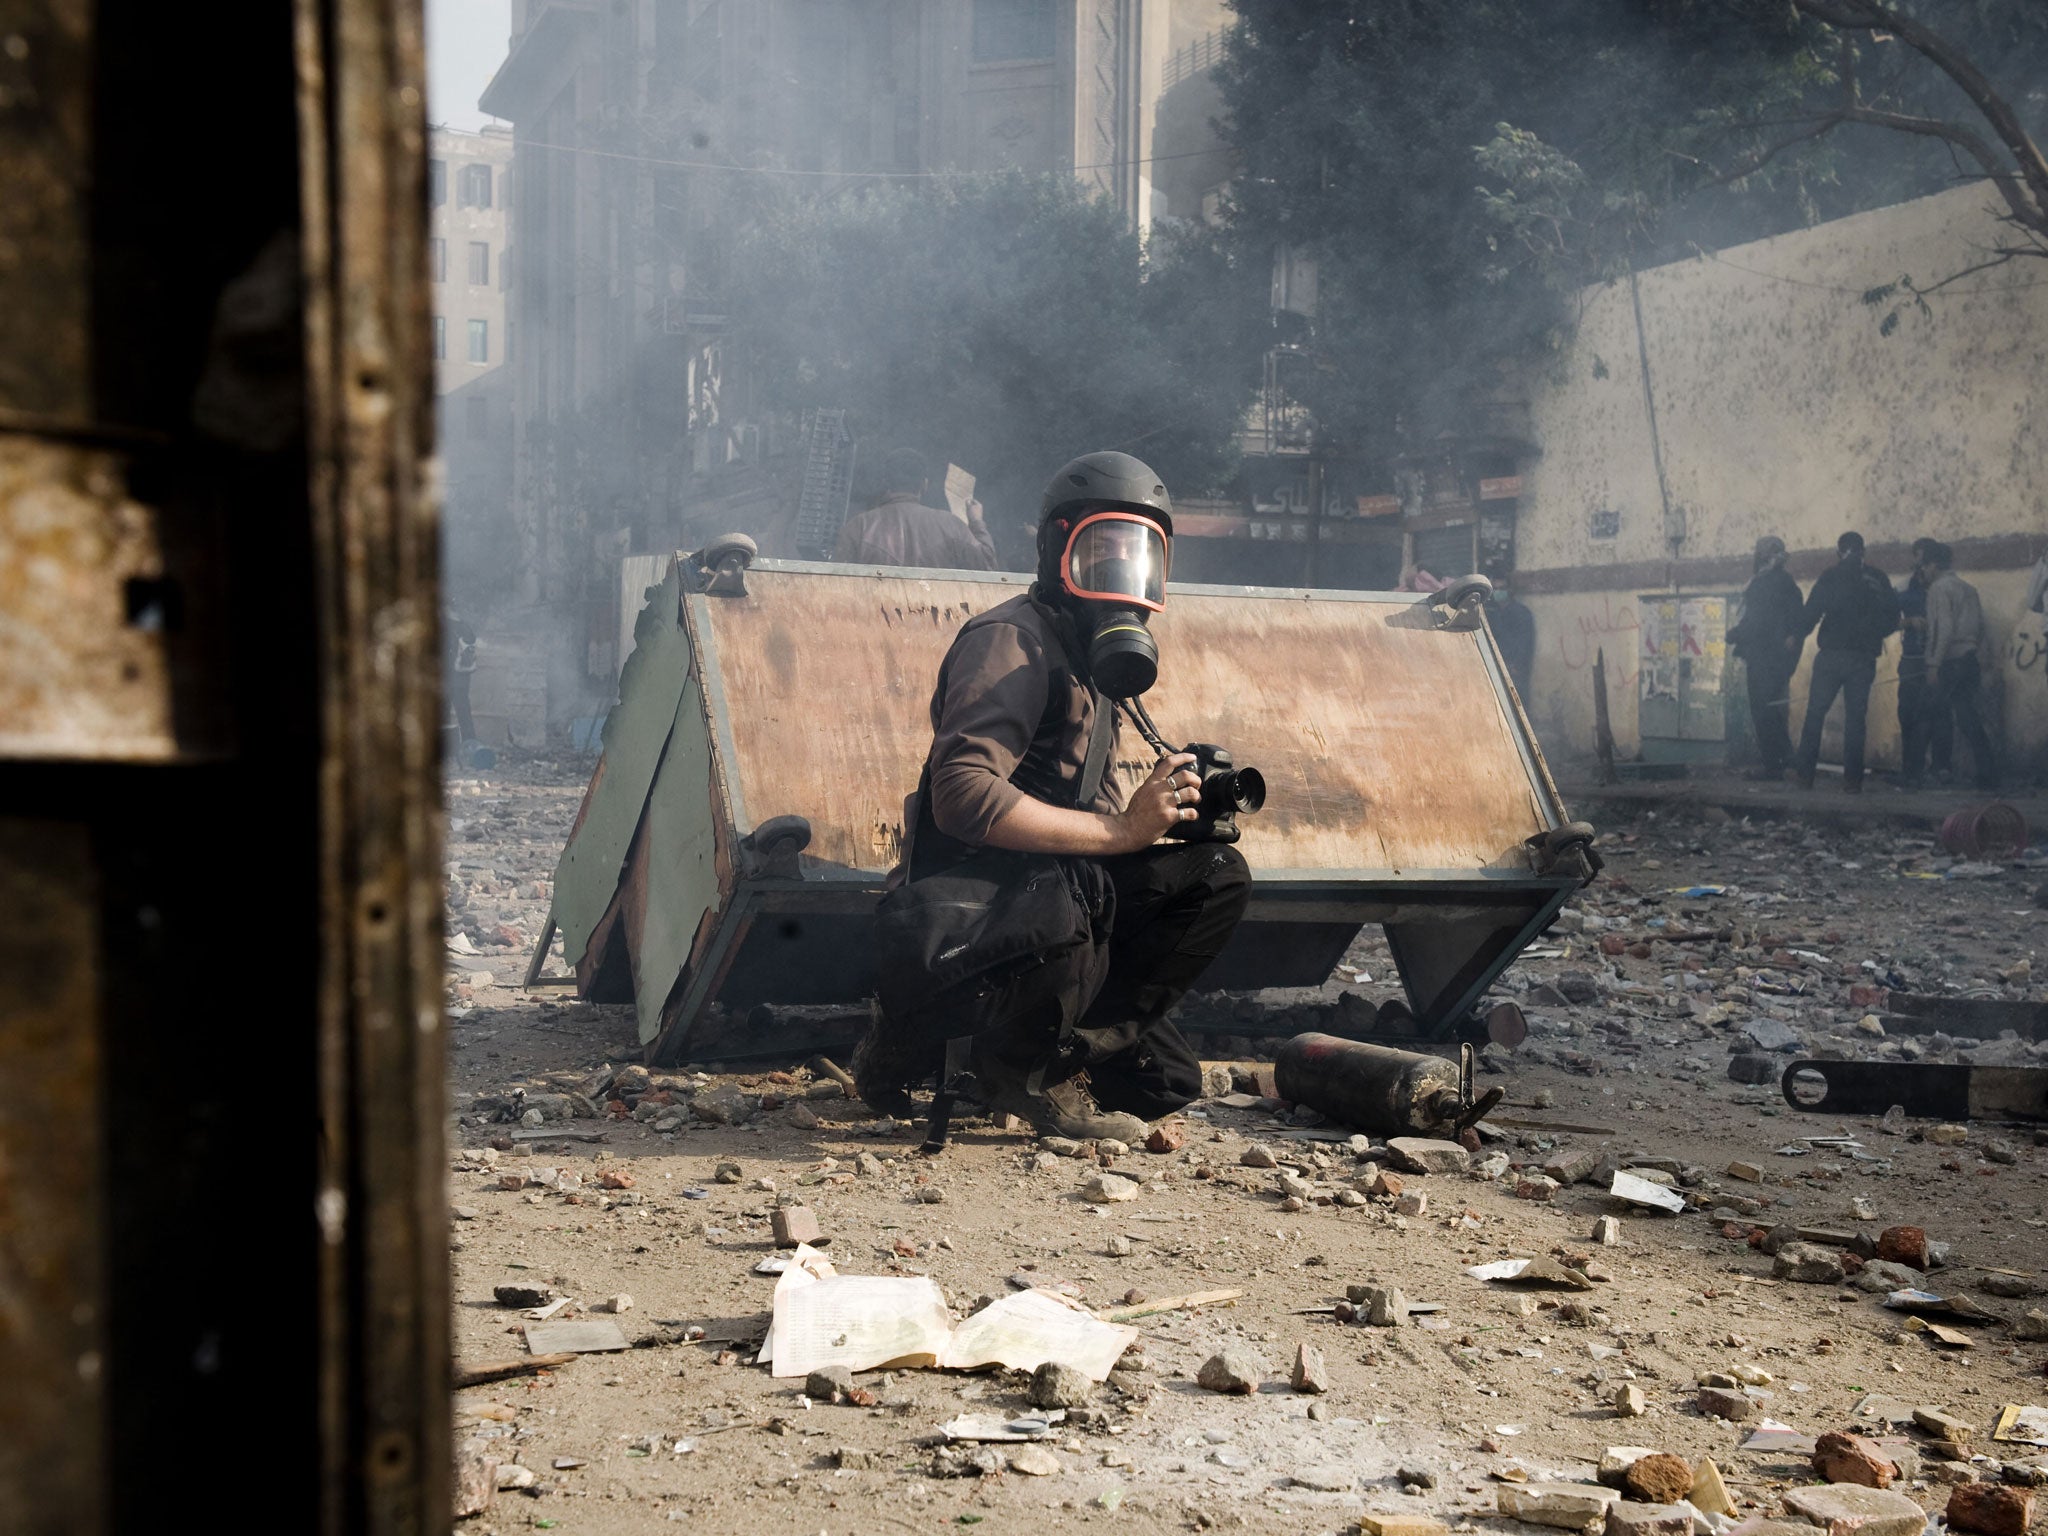 French photographer Remi Ochlik covering demonstrations in Cairo, who died last year in Homs, Syria